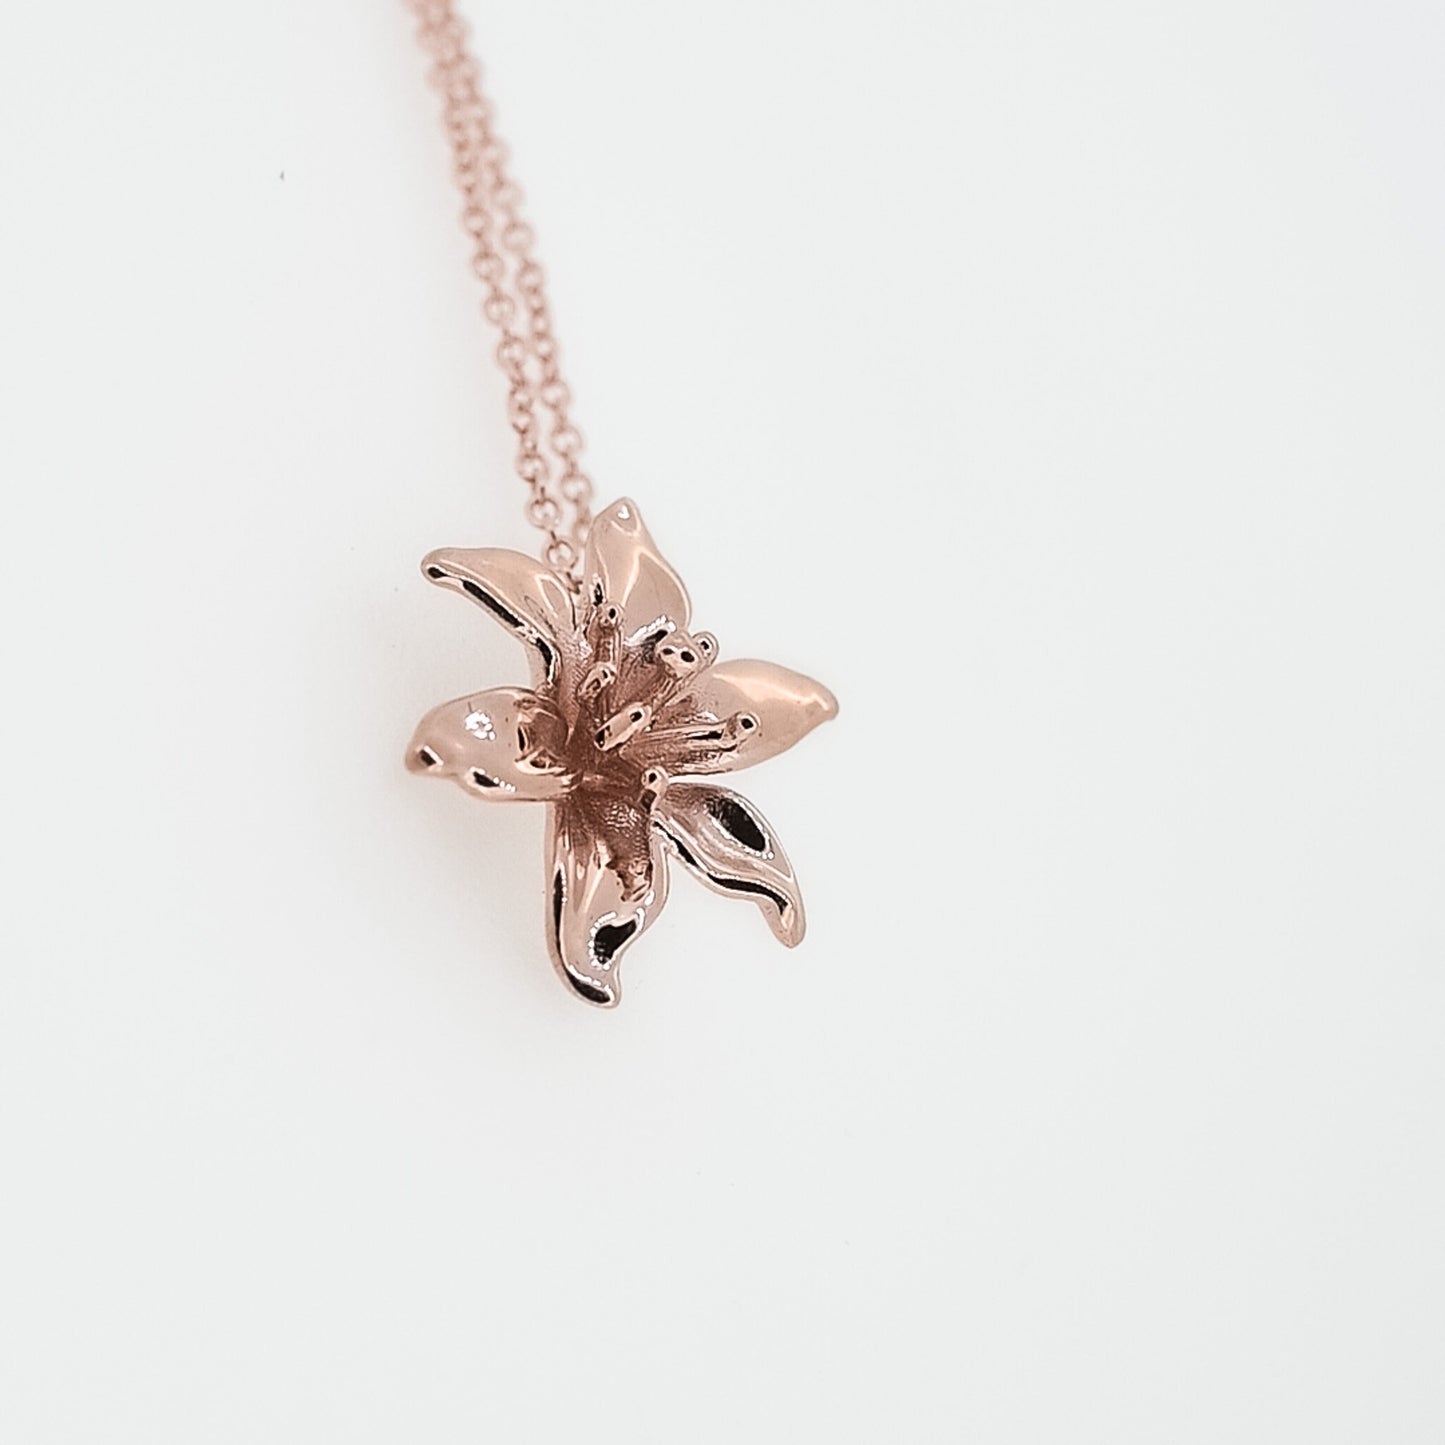 Lily Pendant Necklace in 14k Solid Gold, Sterling Silver, Vermeil, of 14K Gold Plate